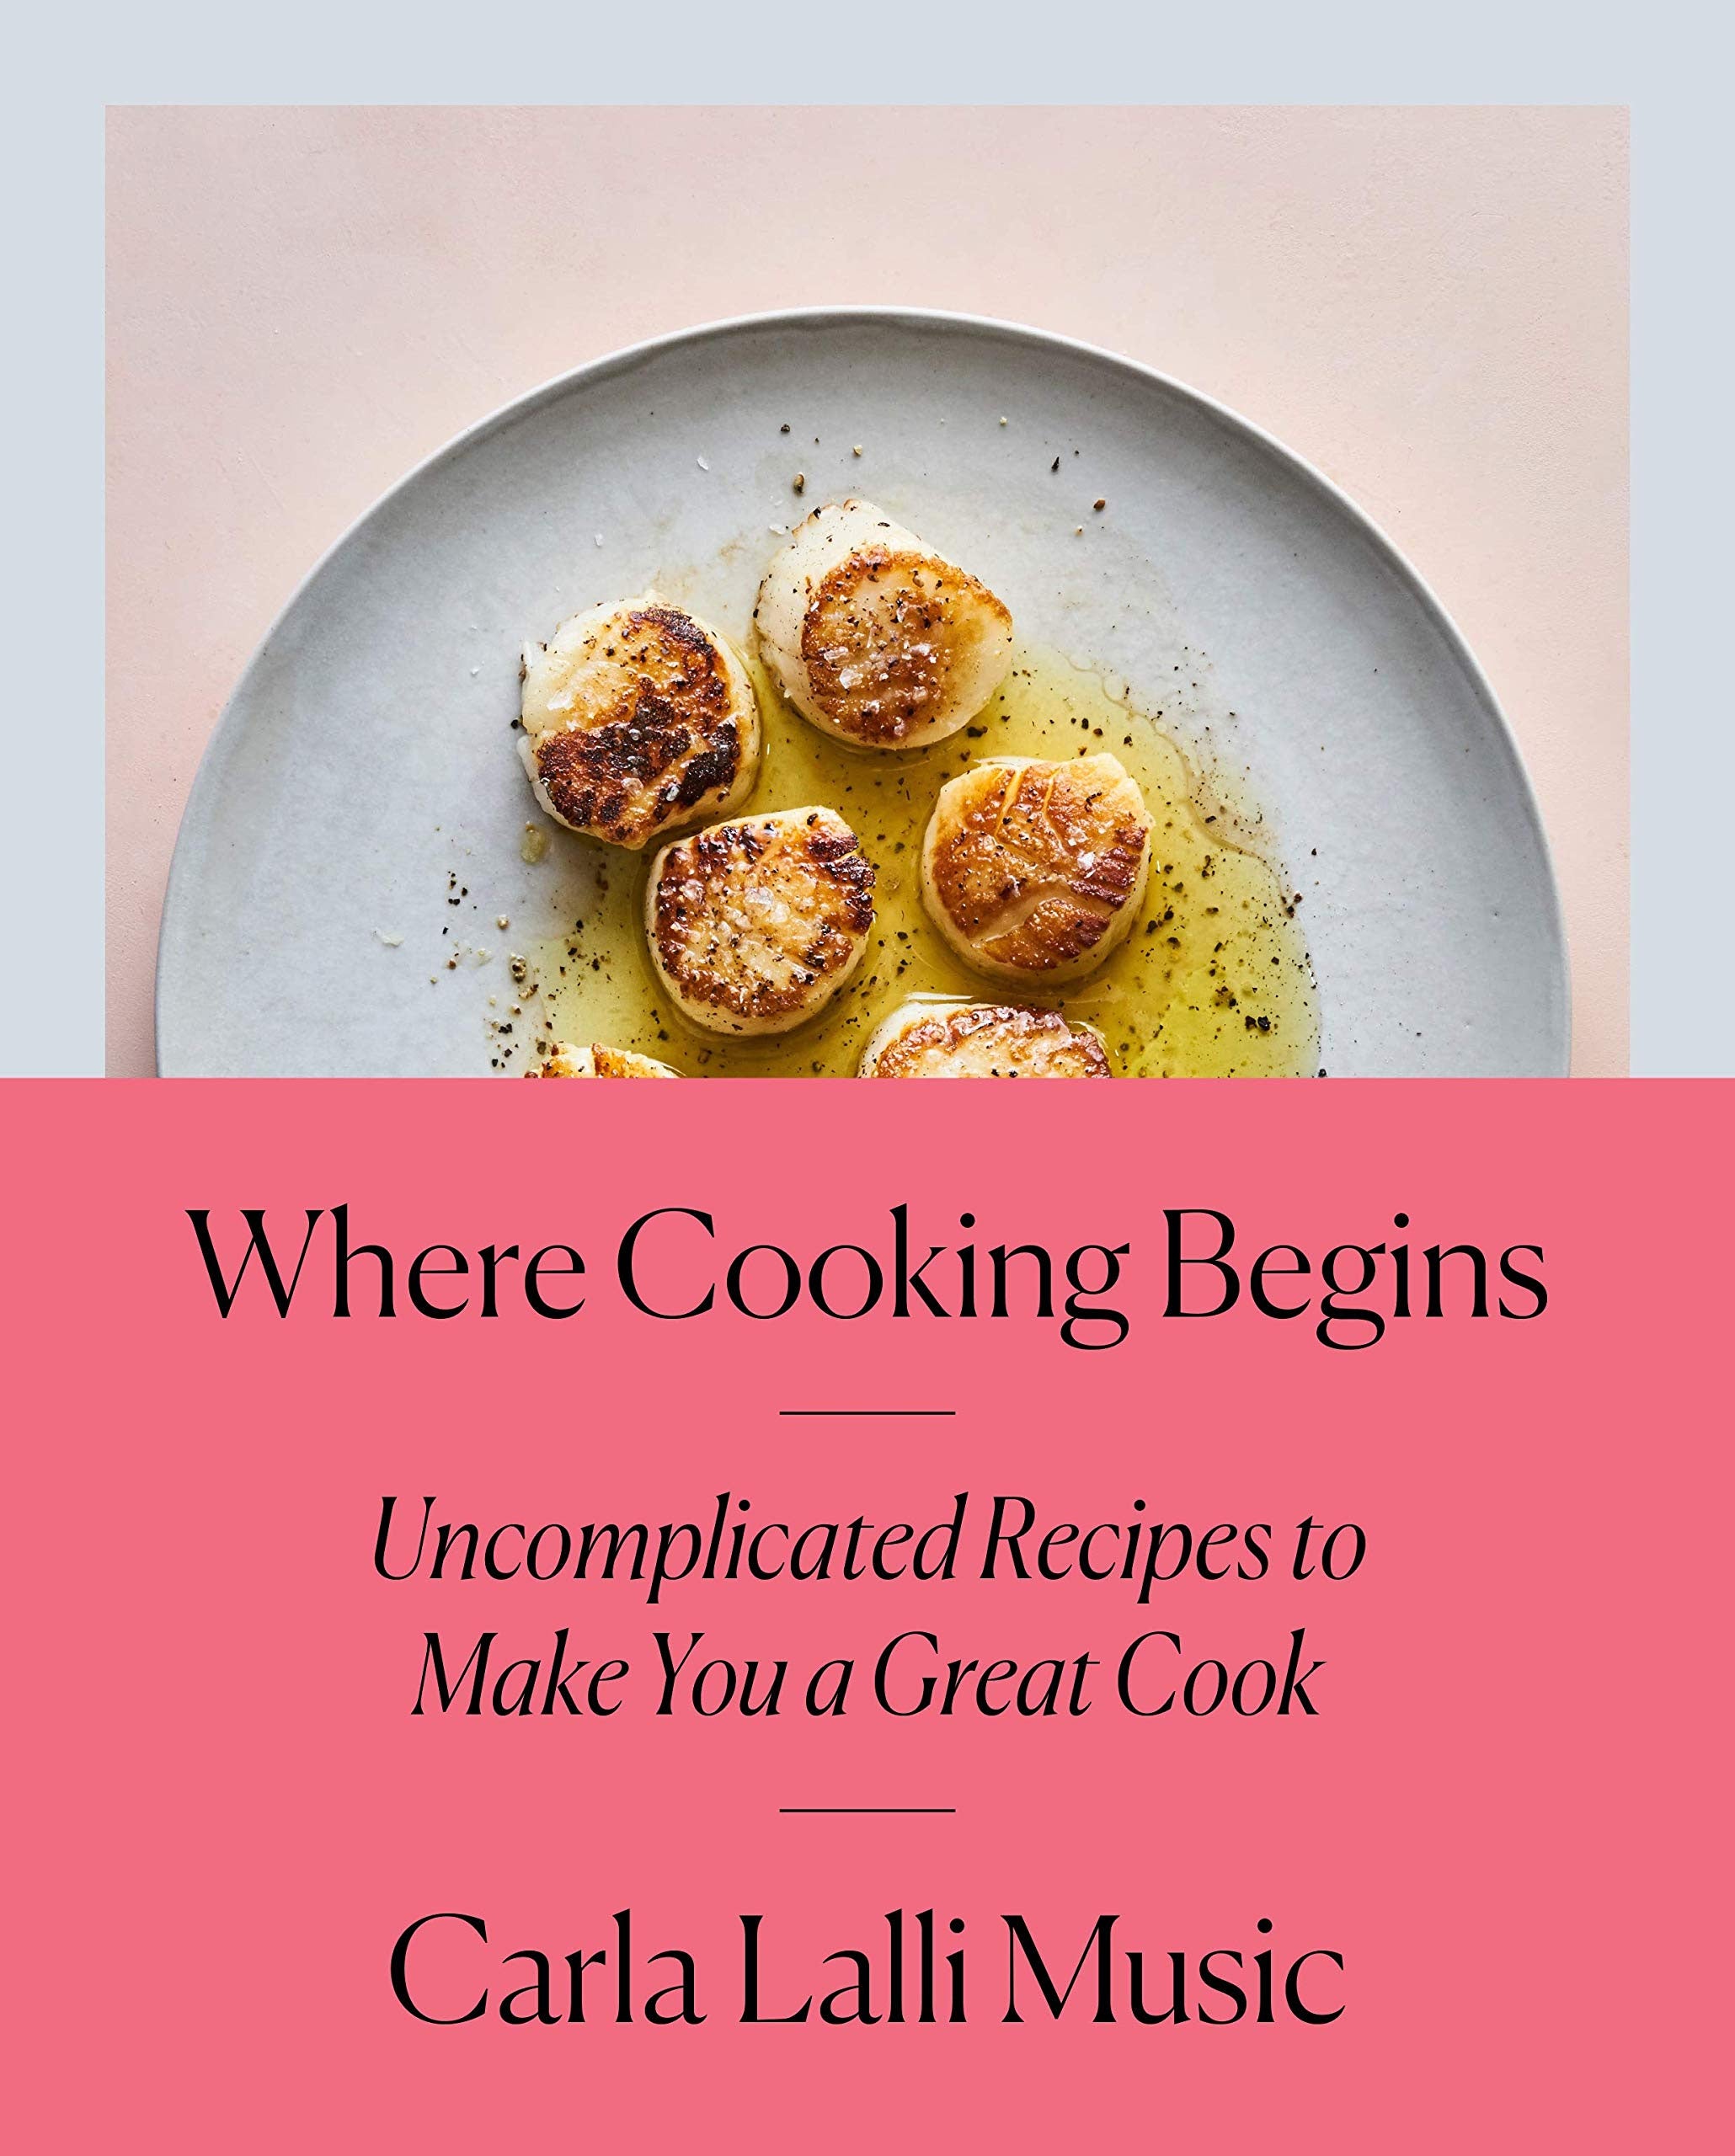 Where Cooking Begins: Uncomplicated Recipes to Make You a Great Cook (Carla Lalli Music) *Signed*